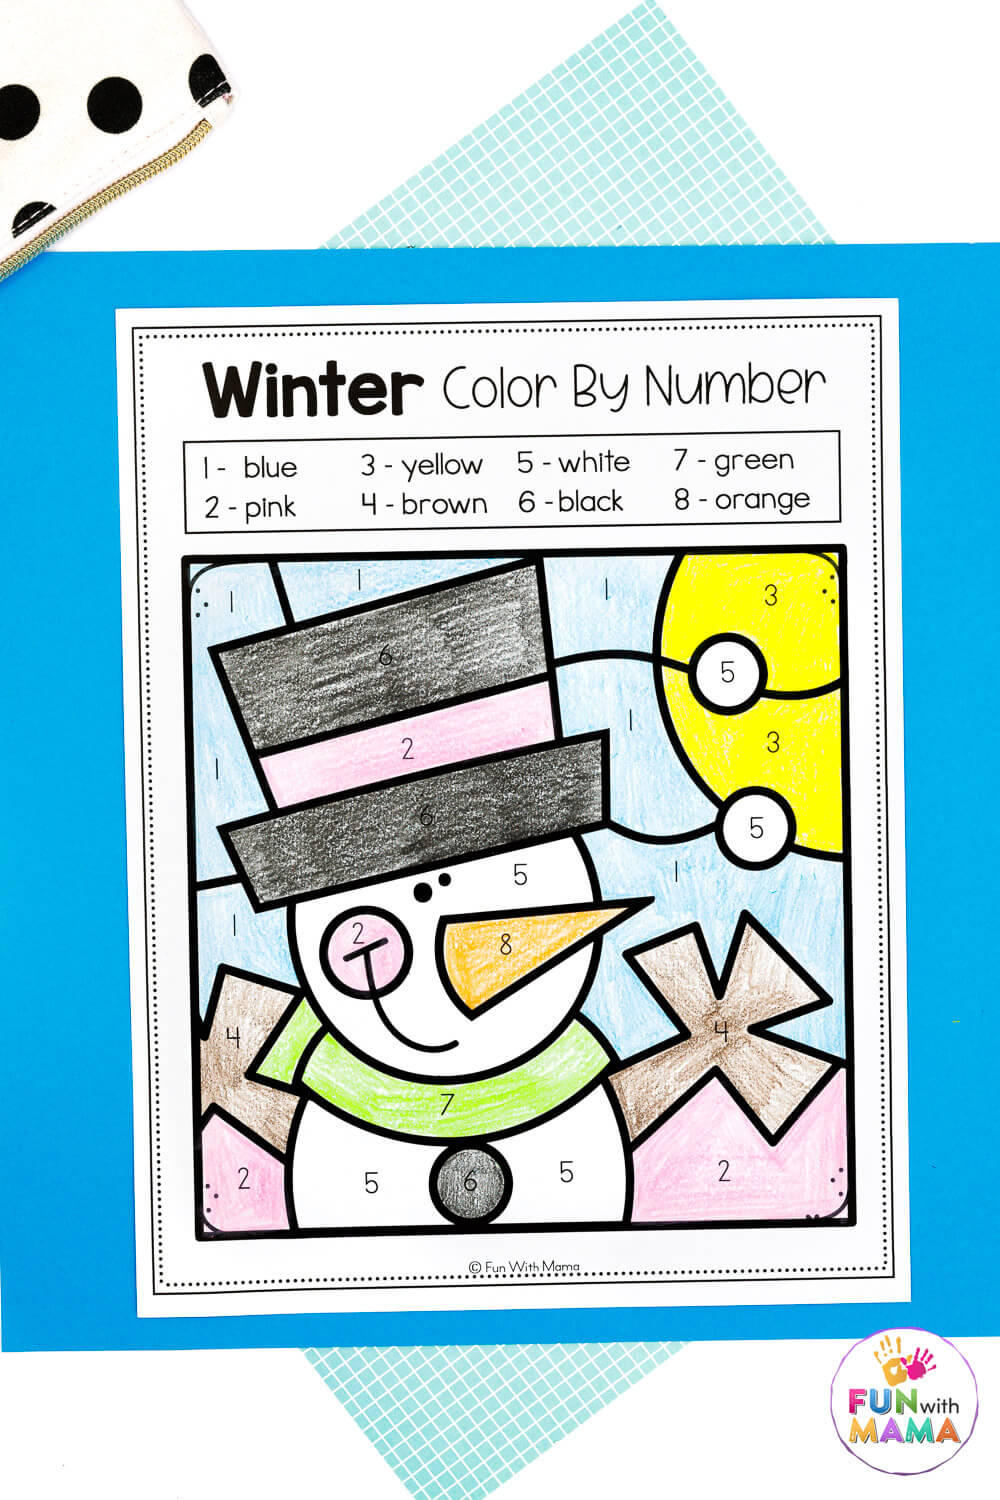 snowman-color-by-number_winter-color-by-number-free-printable-kids